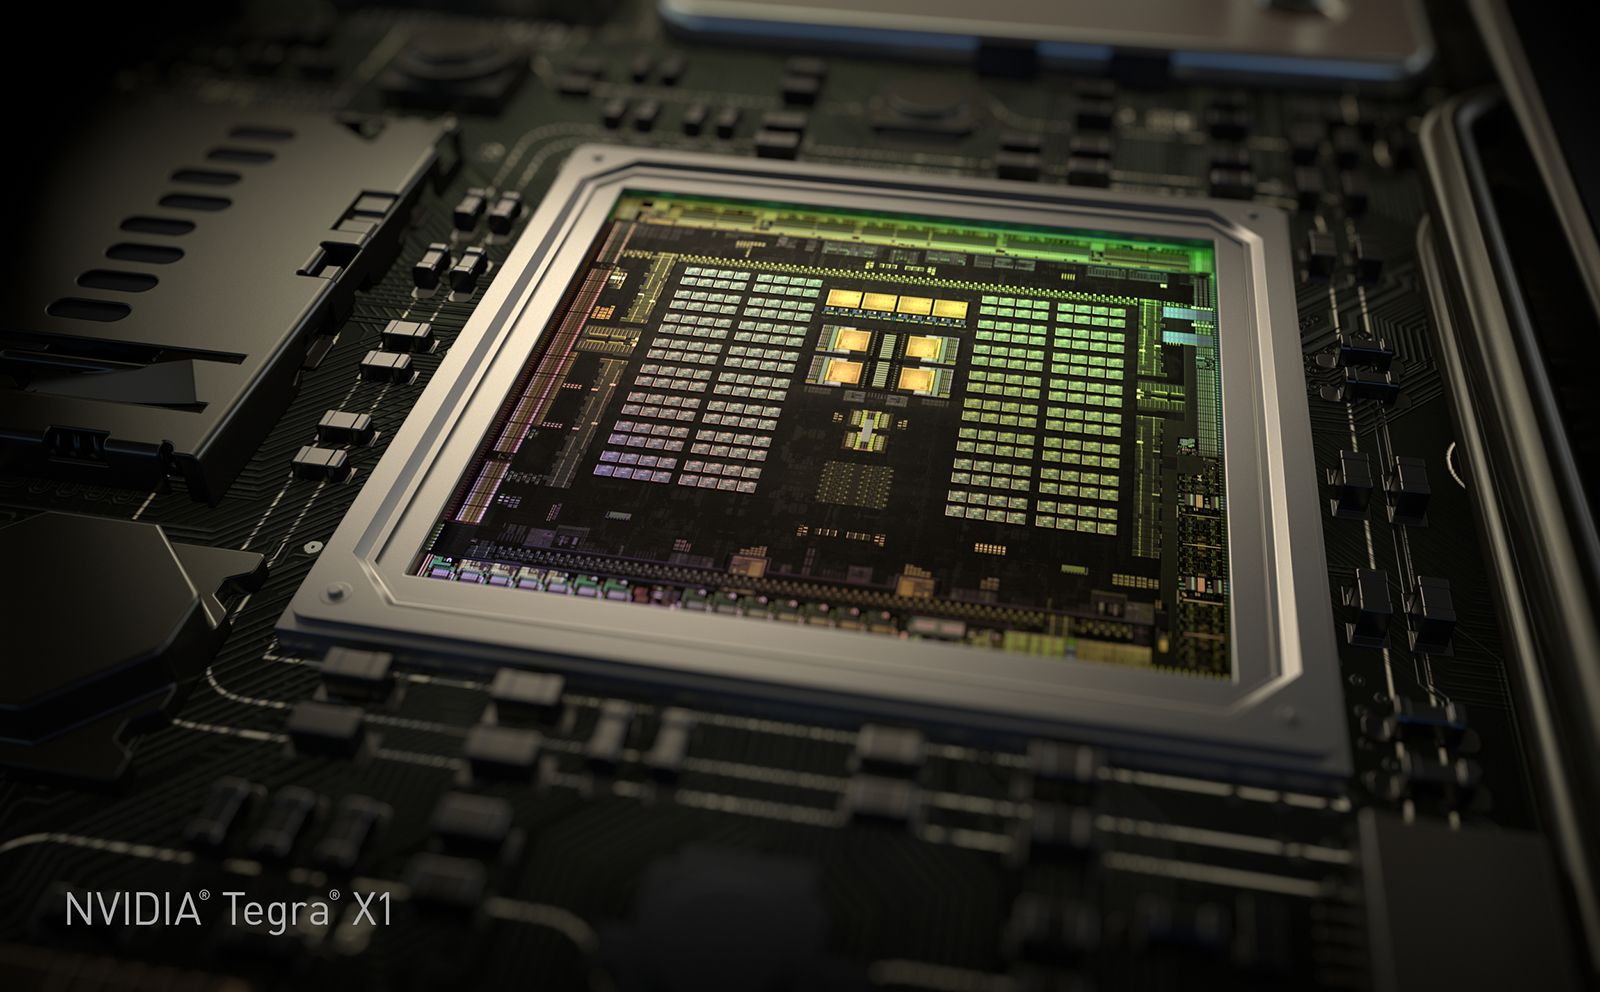 nvidia tegra x1 chip to make android phones gaming beasts even runs unreal engine 4 elemental demo image 1